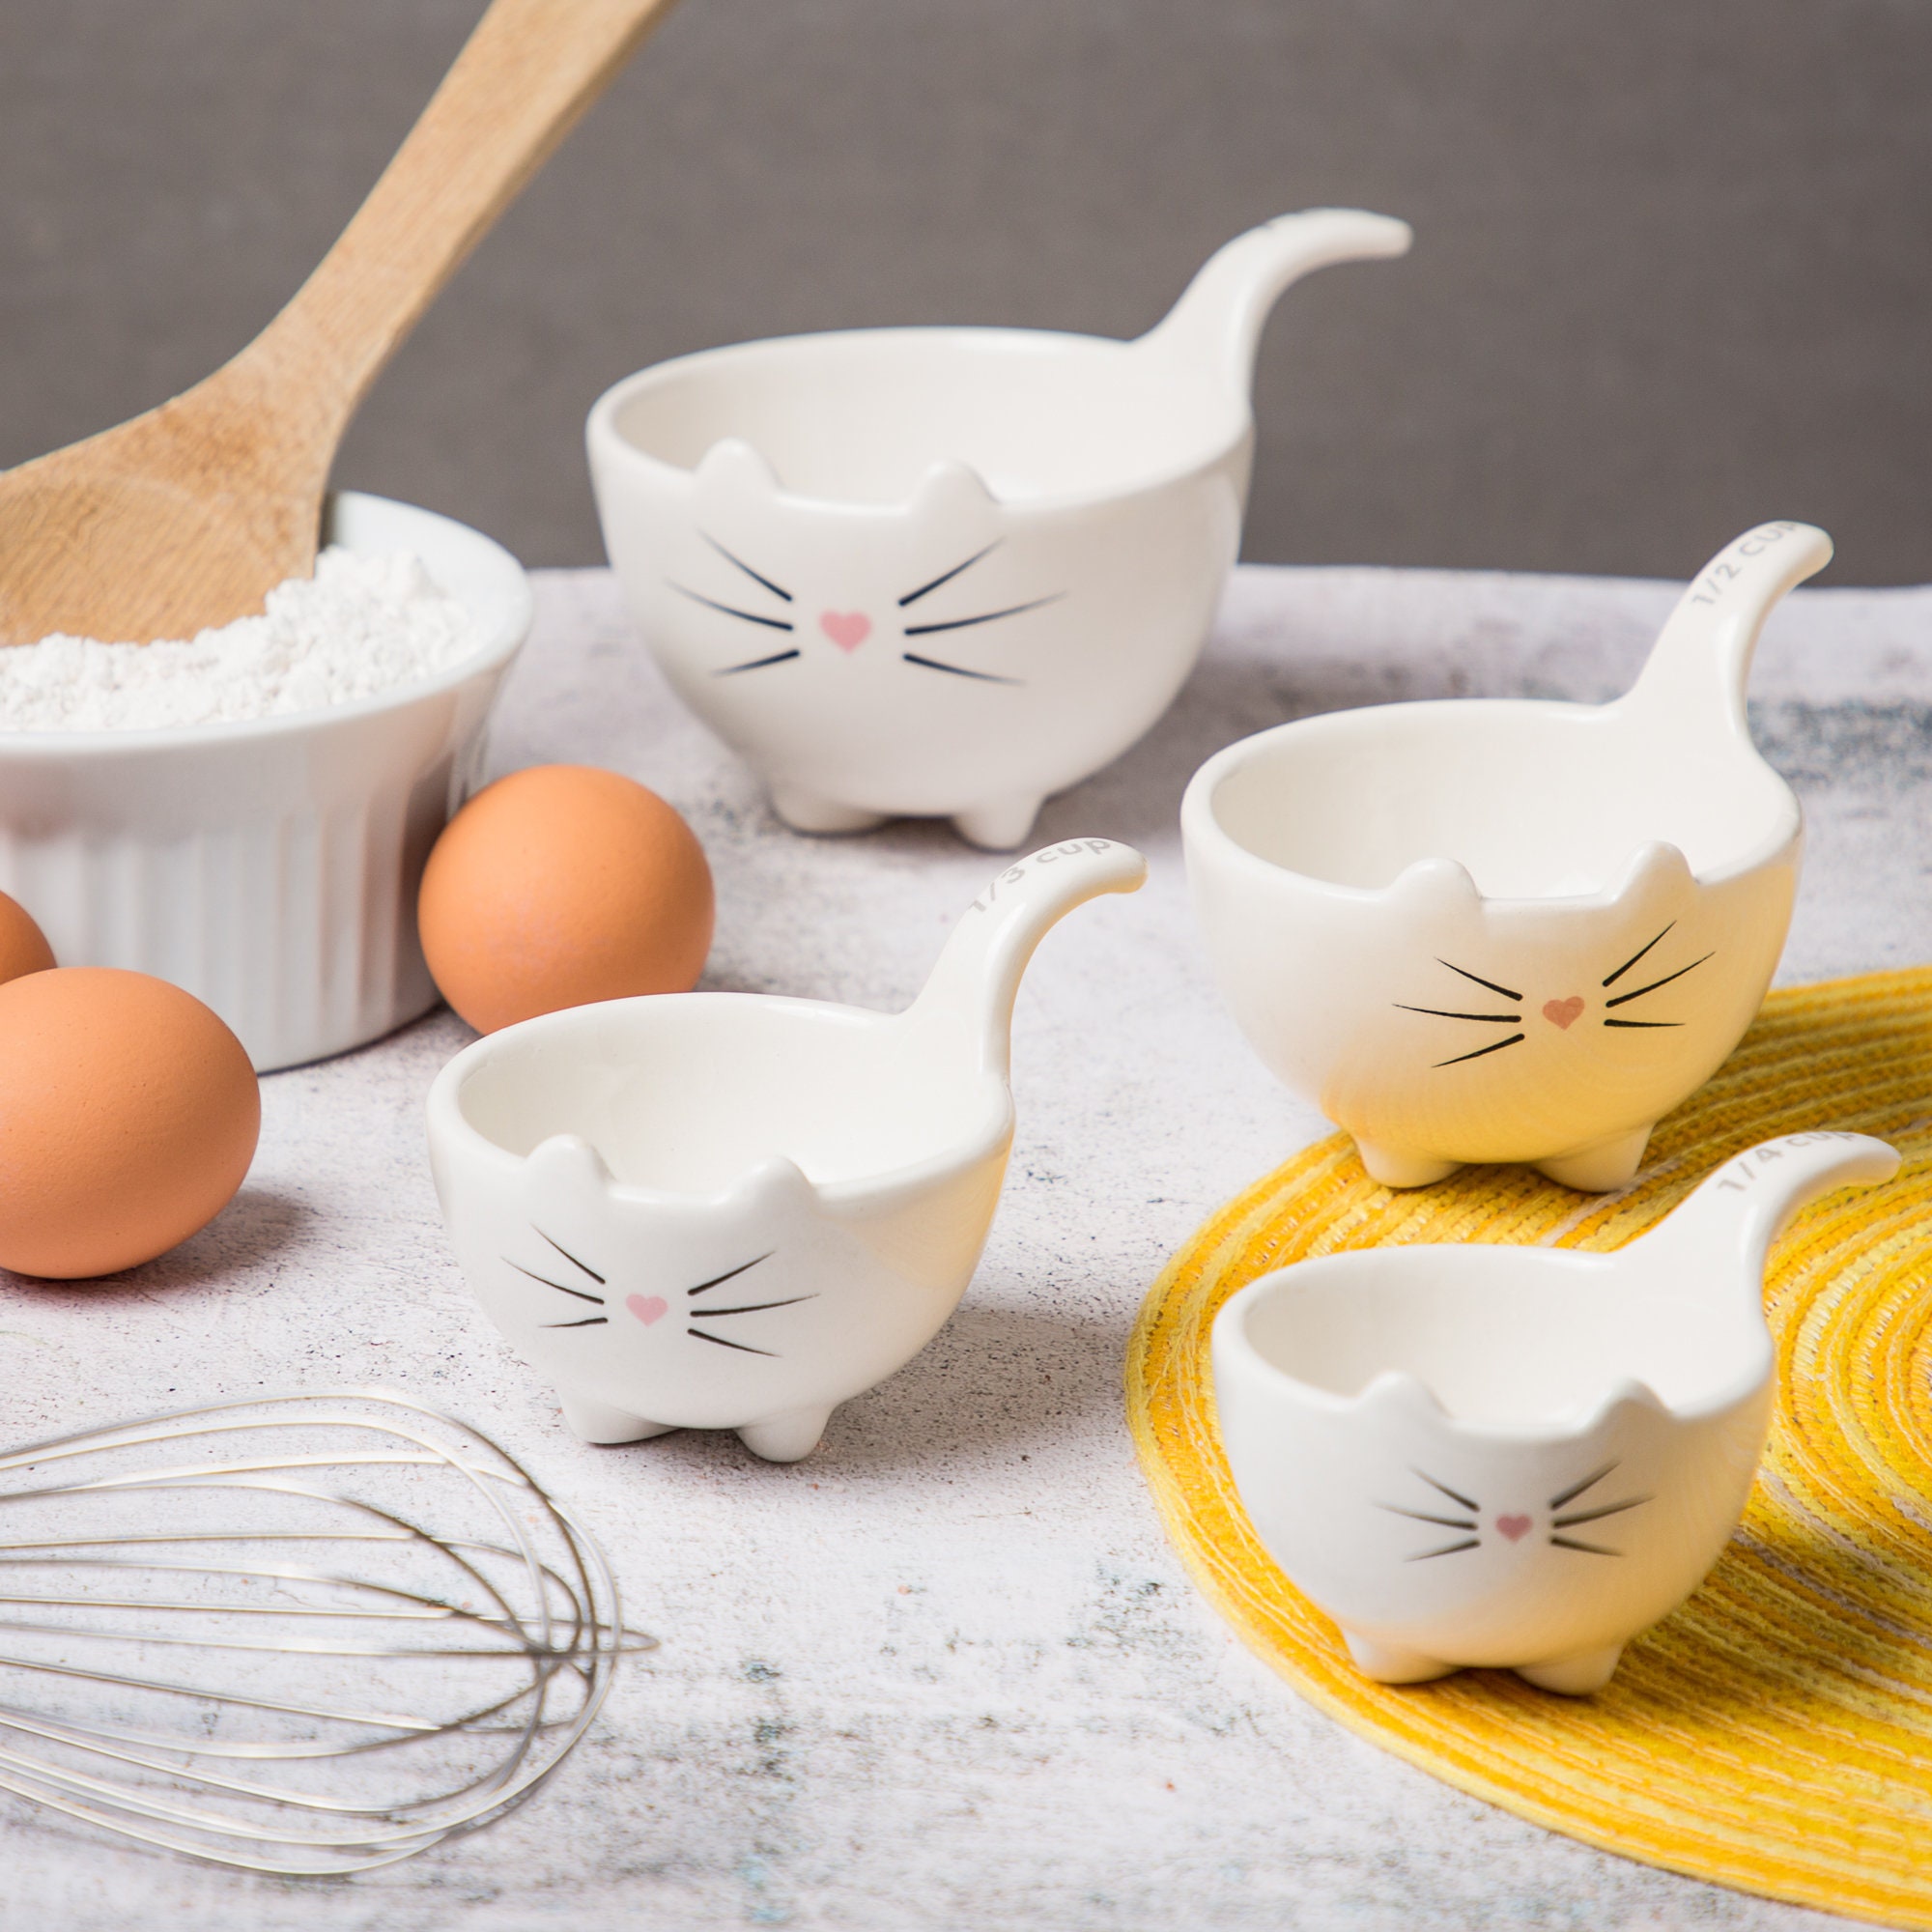 4-Pcs Adorable Cat Ceramic Measuring Cups Set - Cute Measuring Cups for Kids Baking - Space Saving Measuring Cup Set for Food Portion Control - Cute